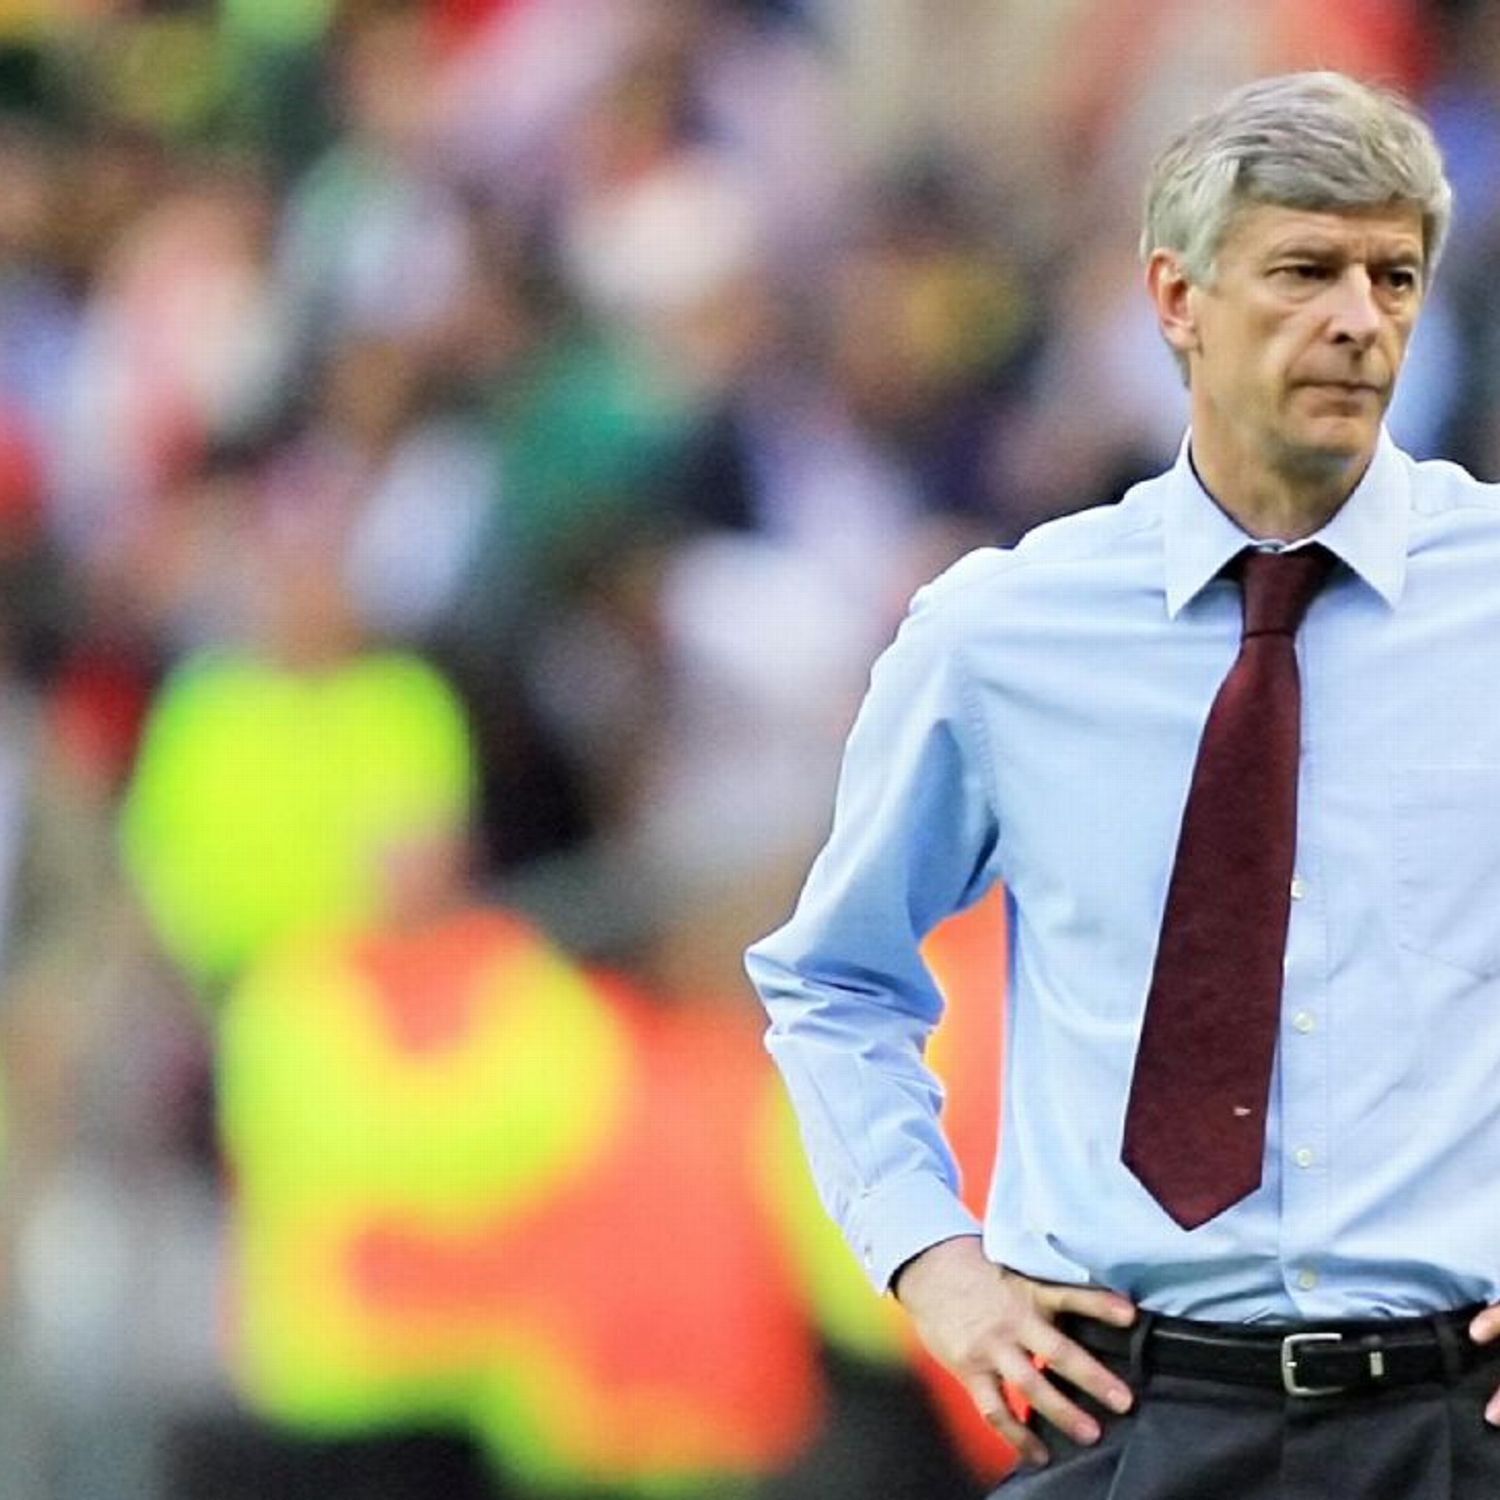 Top Tenner The 10 worst moments of Arsene Wenger Arsenal tenure - ESPN FC1500 x 1500